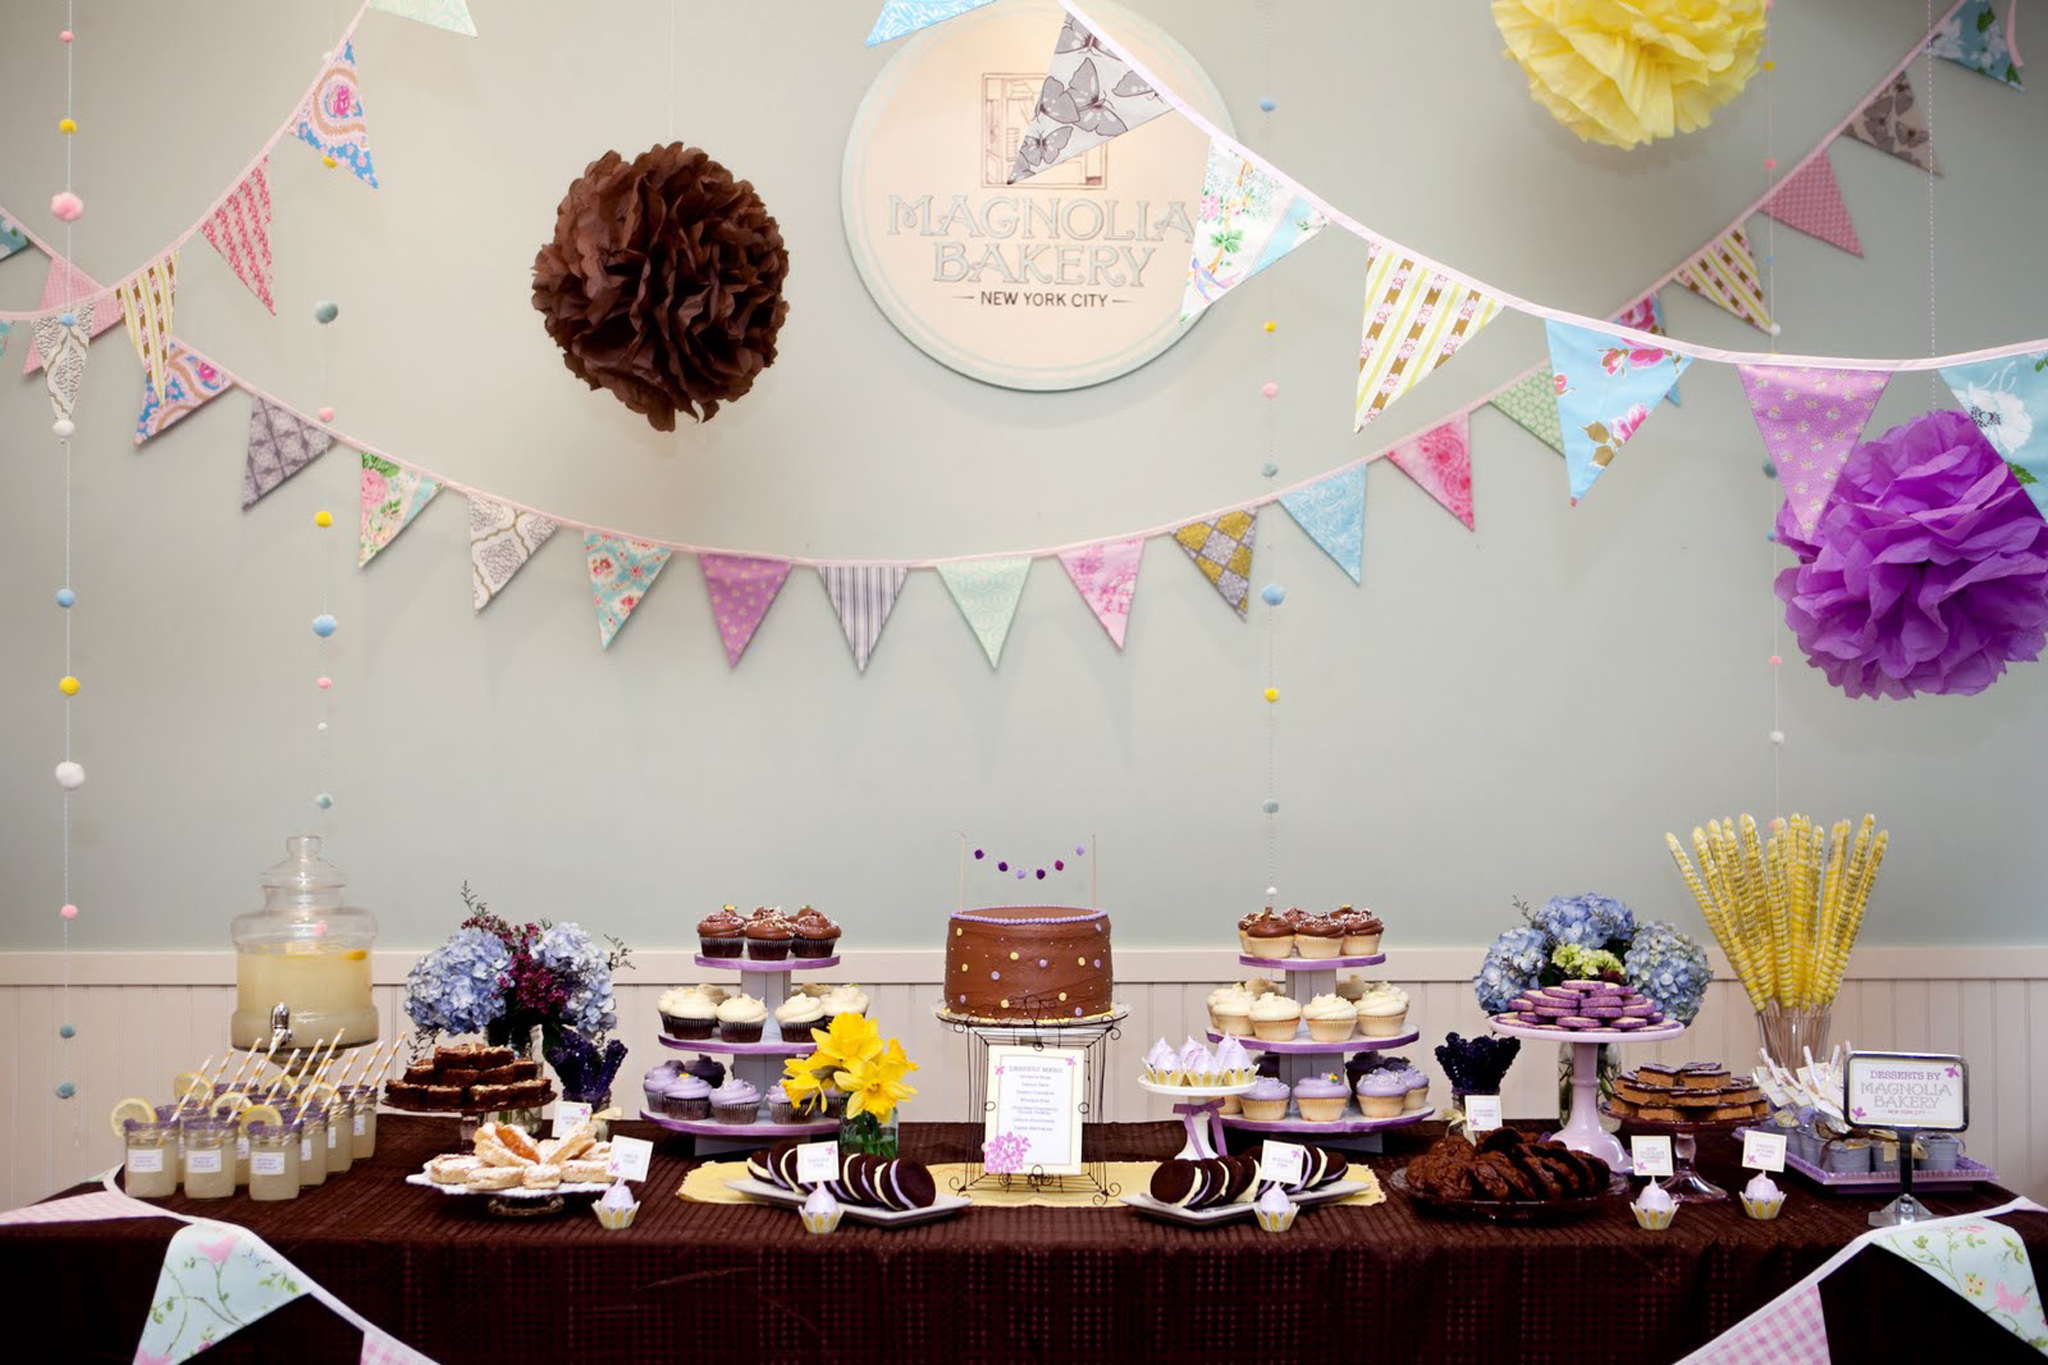 magnolia-bakery-birthday-parties-things-to-do-in-upper-west-side-new